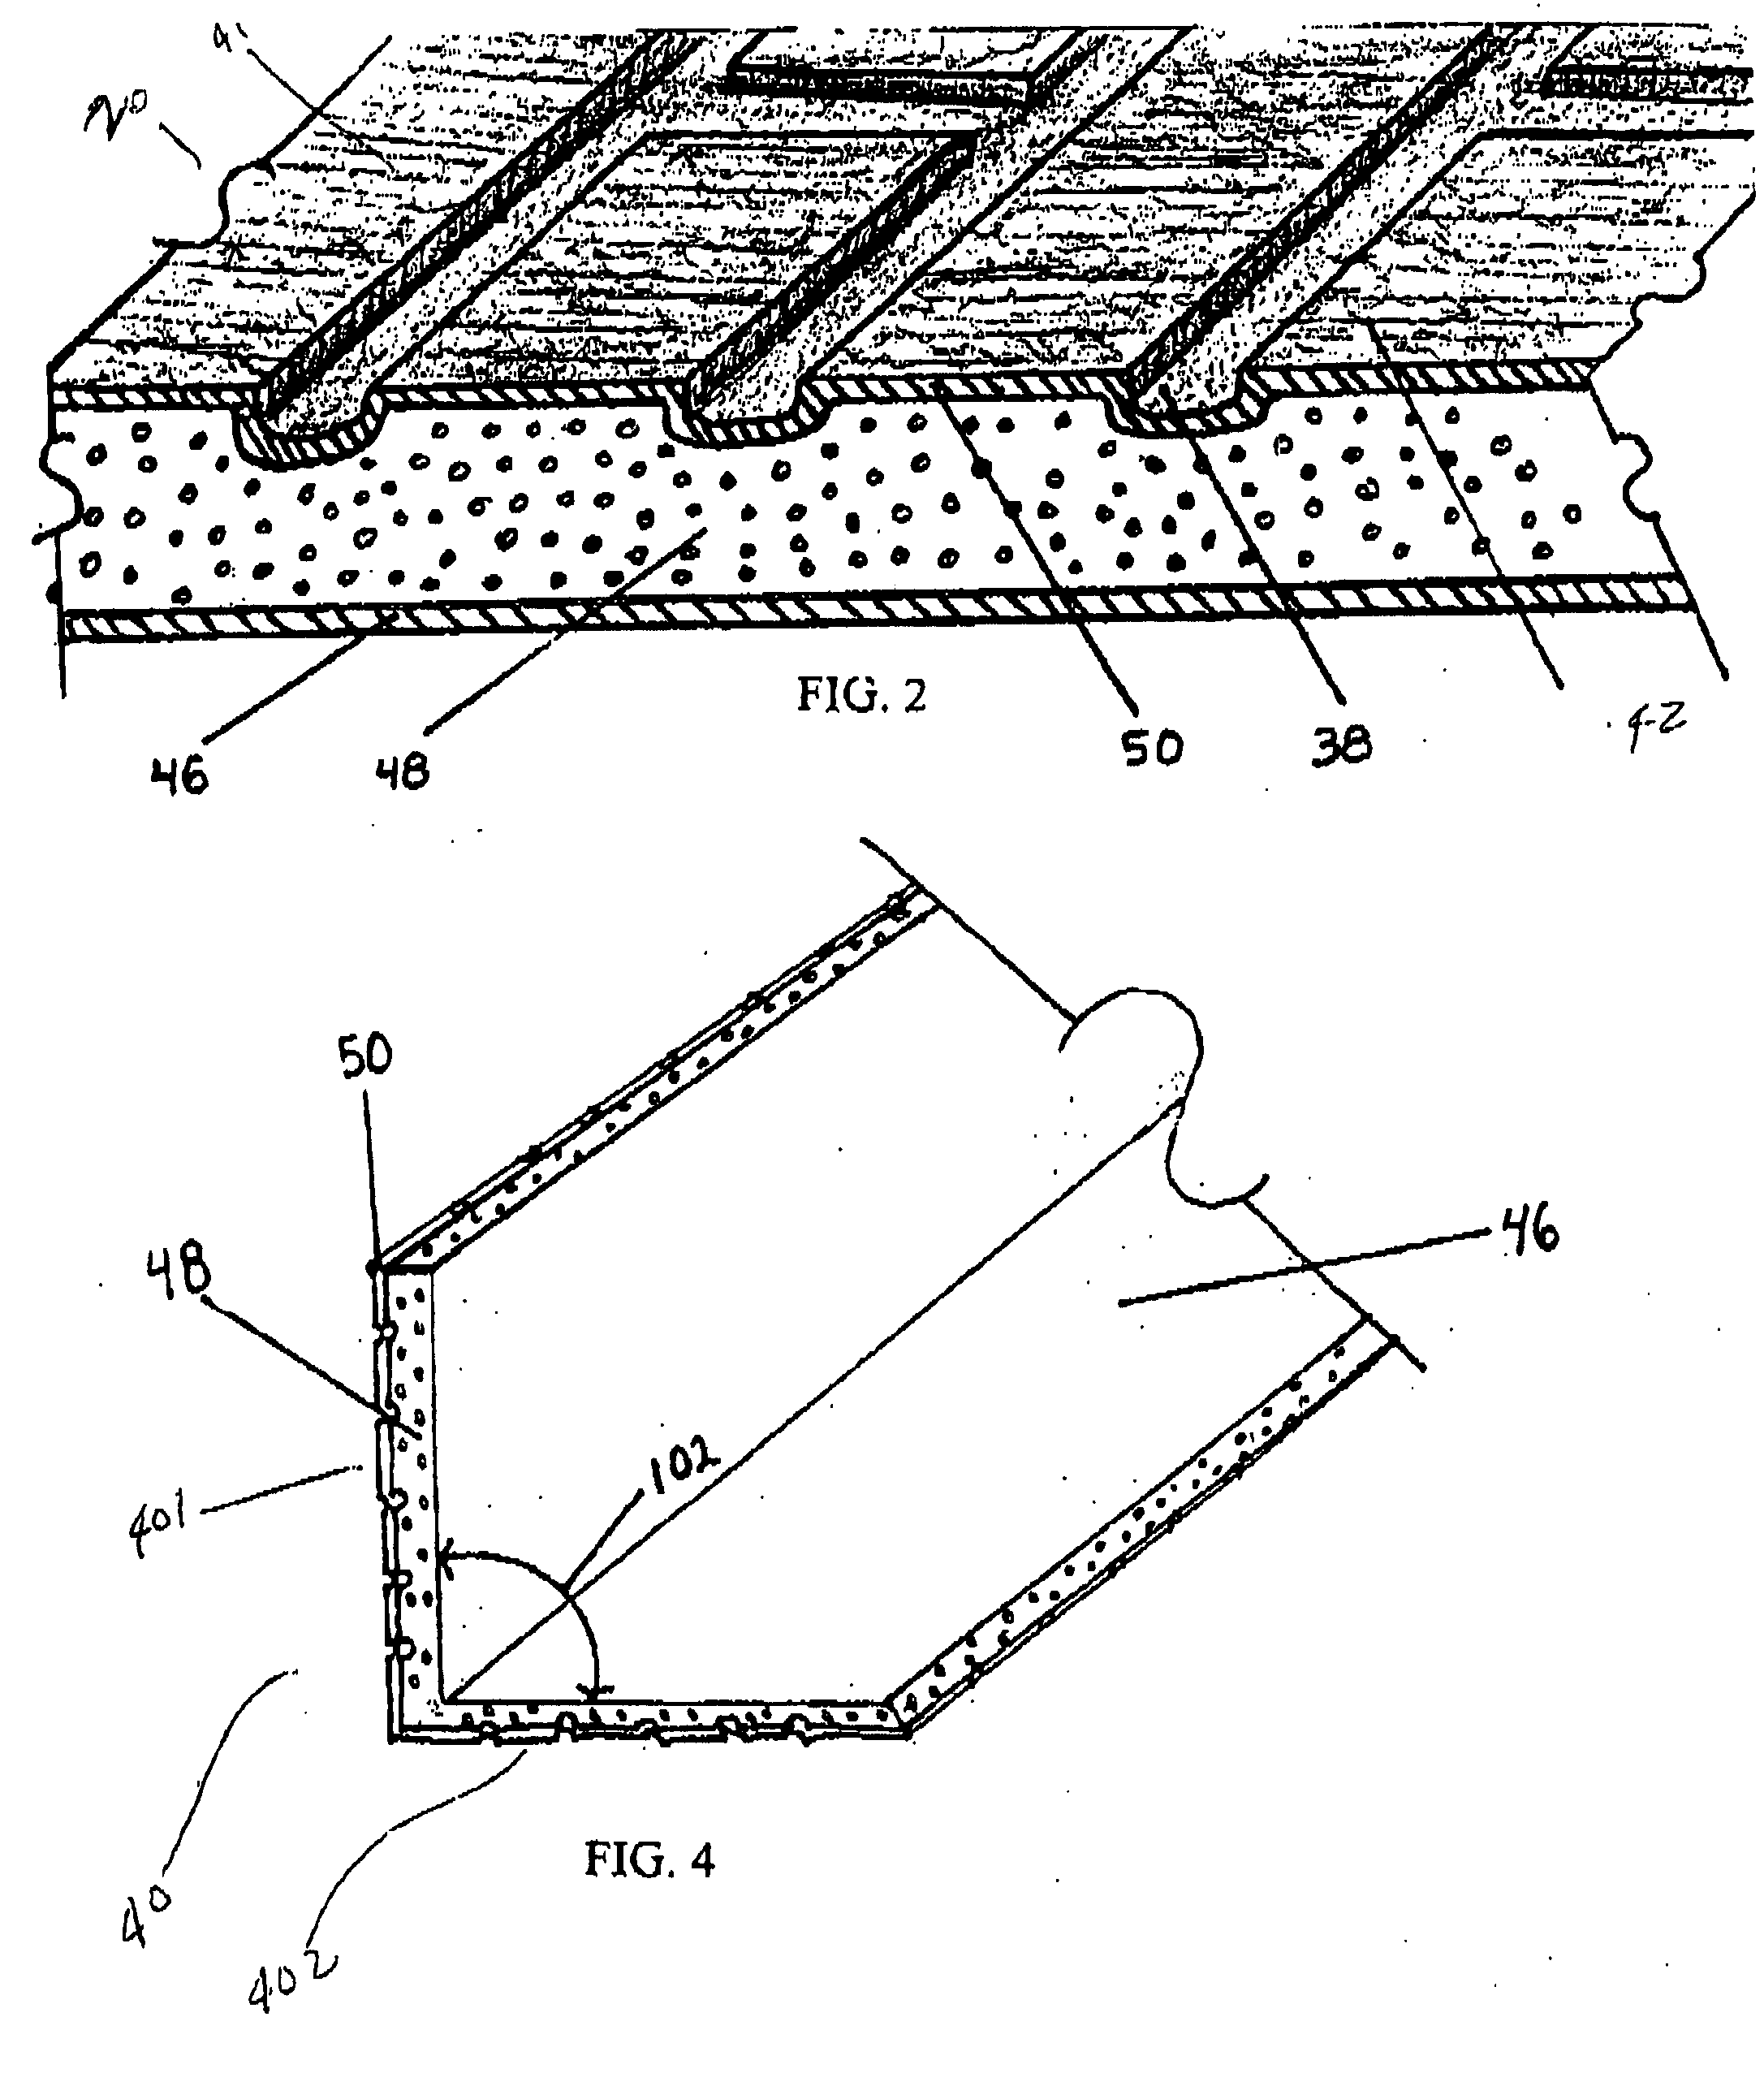 Method and apparatus for forming building panels and components which simulate man-made tiles and natural stones